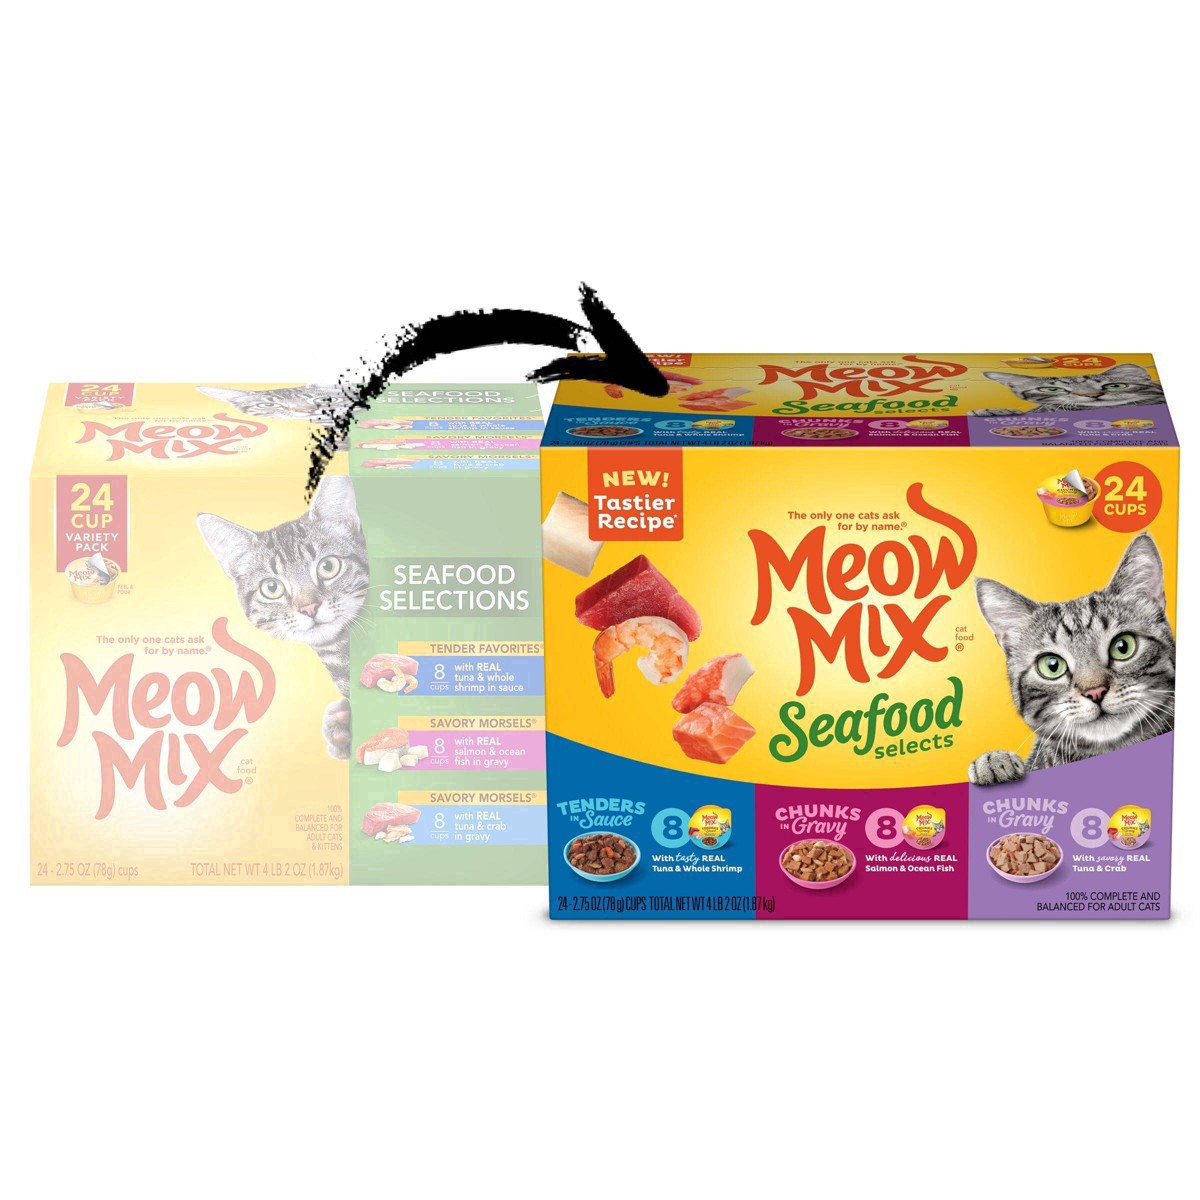 slide 2 of 27, Meow Mix Seafood Selects Wet Cat Food Variety Pack, 24 Cups, 2.75 Oz. Each (Packaging And Formulation Updates Underway), 24 ct